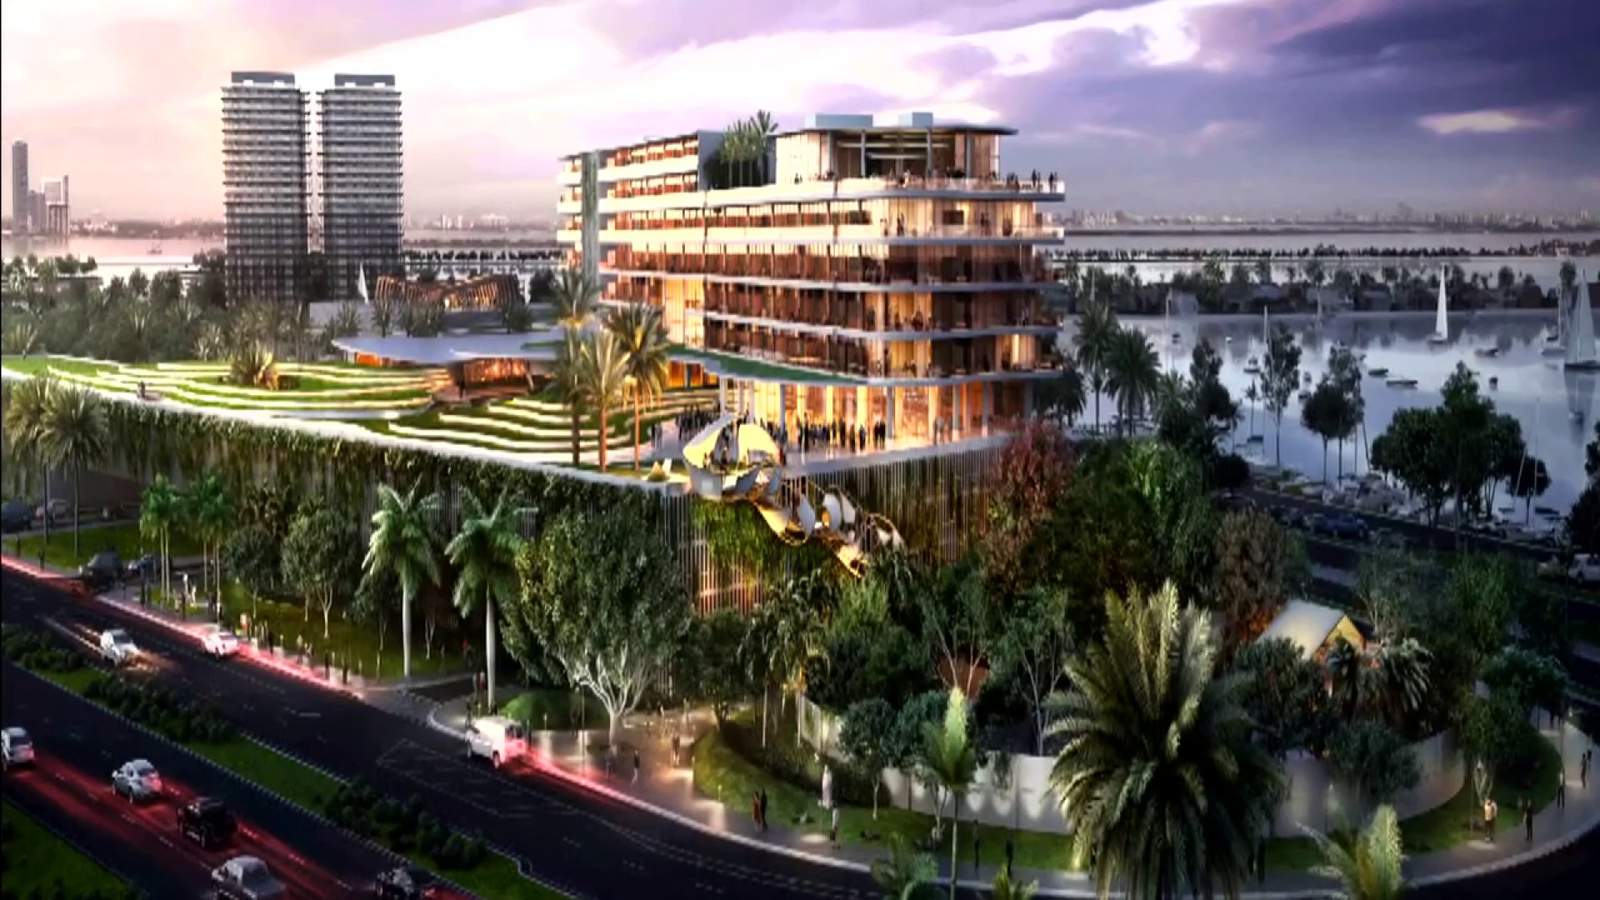 Jungle Island getting a makeover to become a contemporary resort and attraction